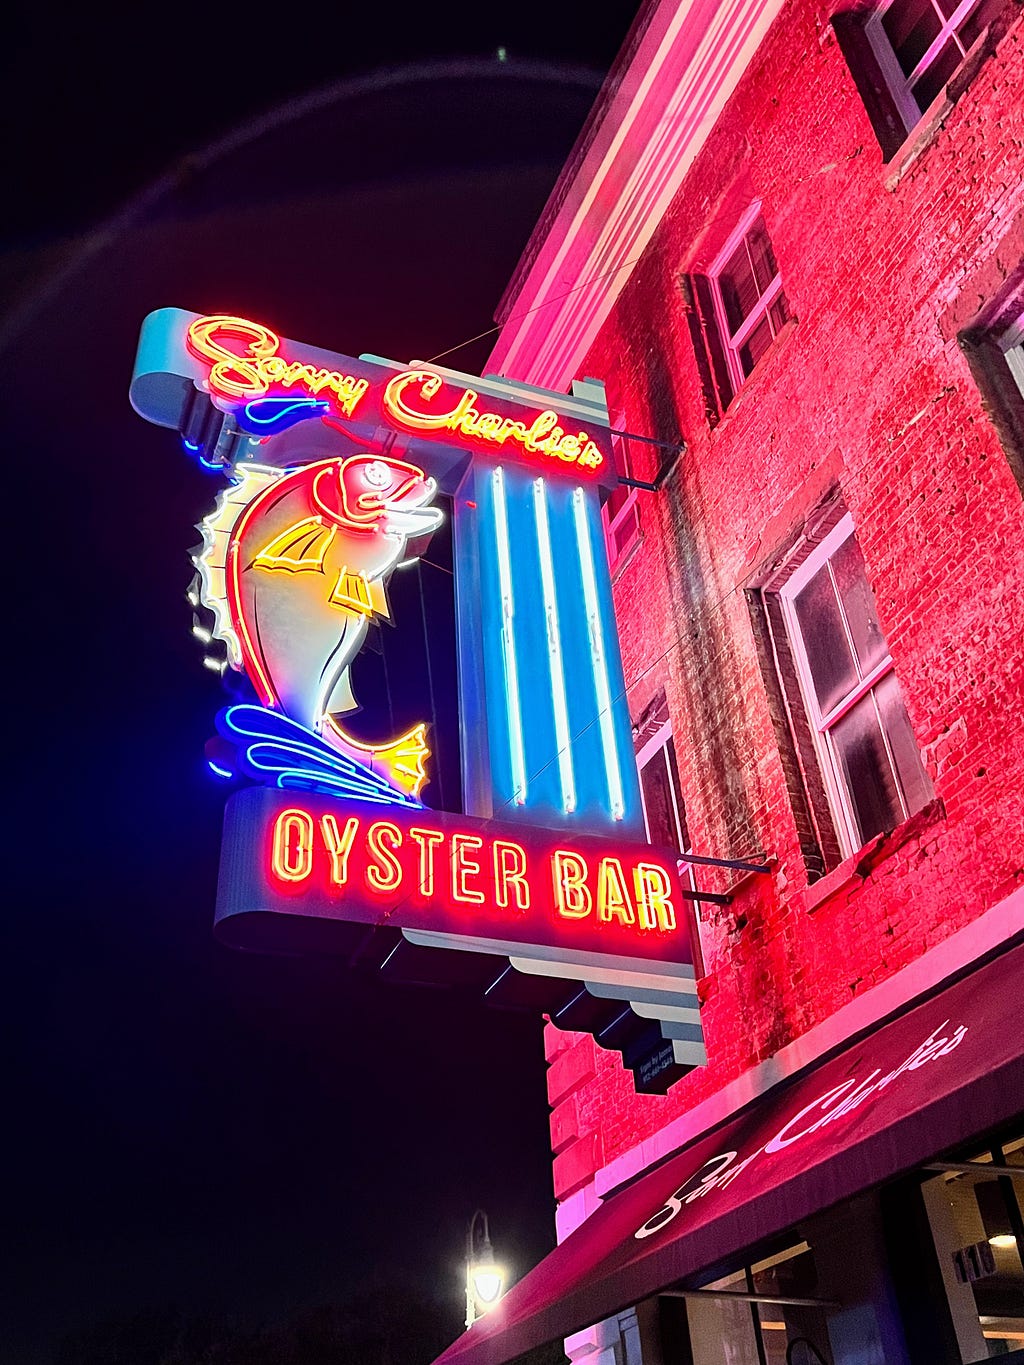 Sorry Charlie’s Oyster Bar; neon sign with a brightly colored fish